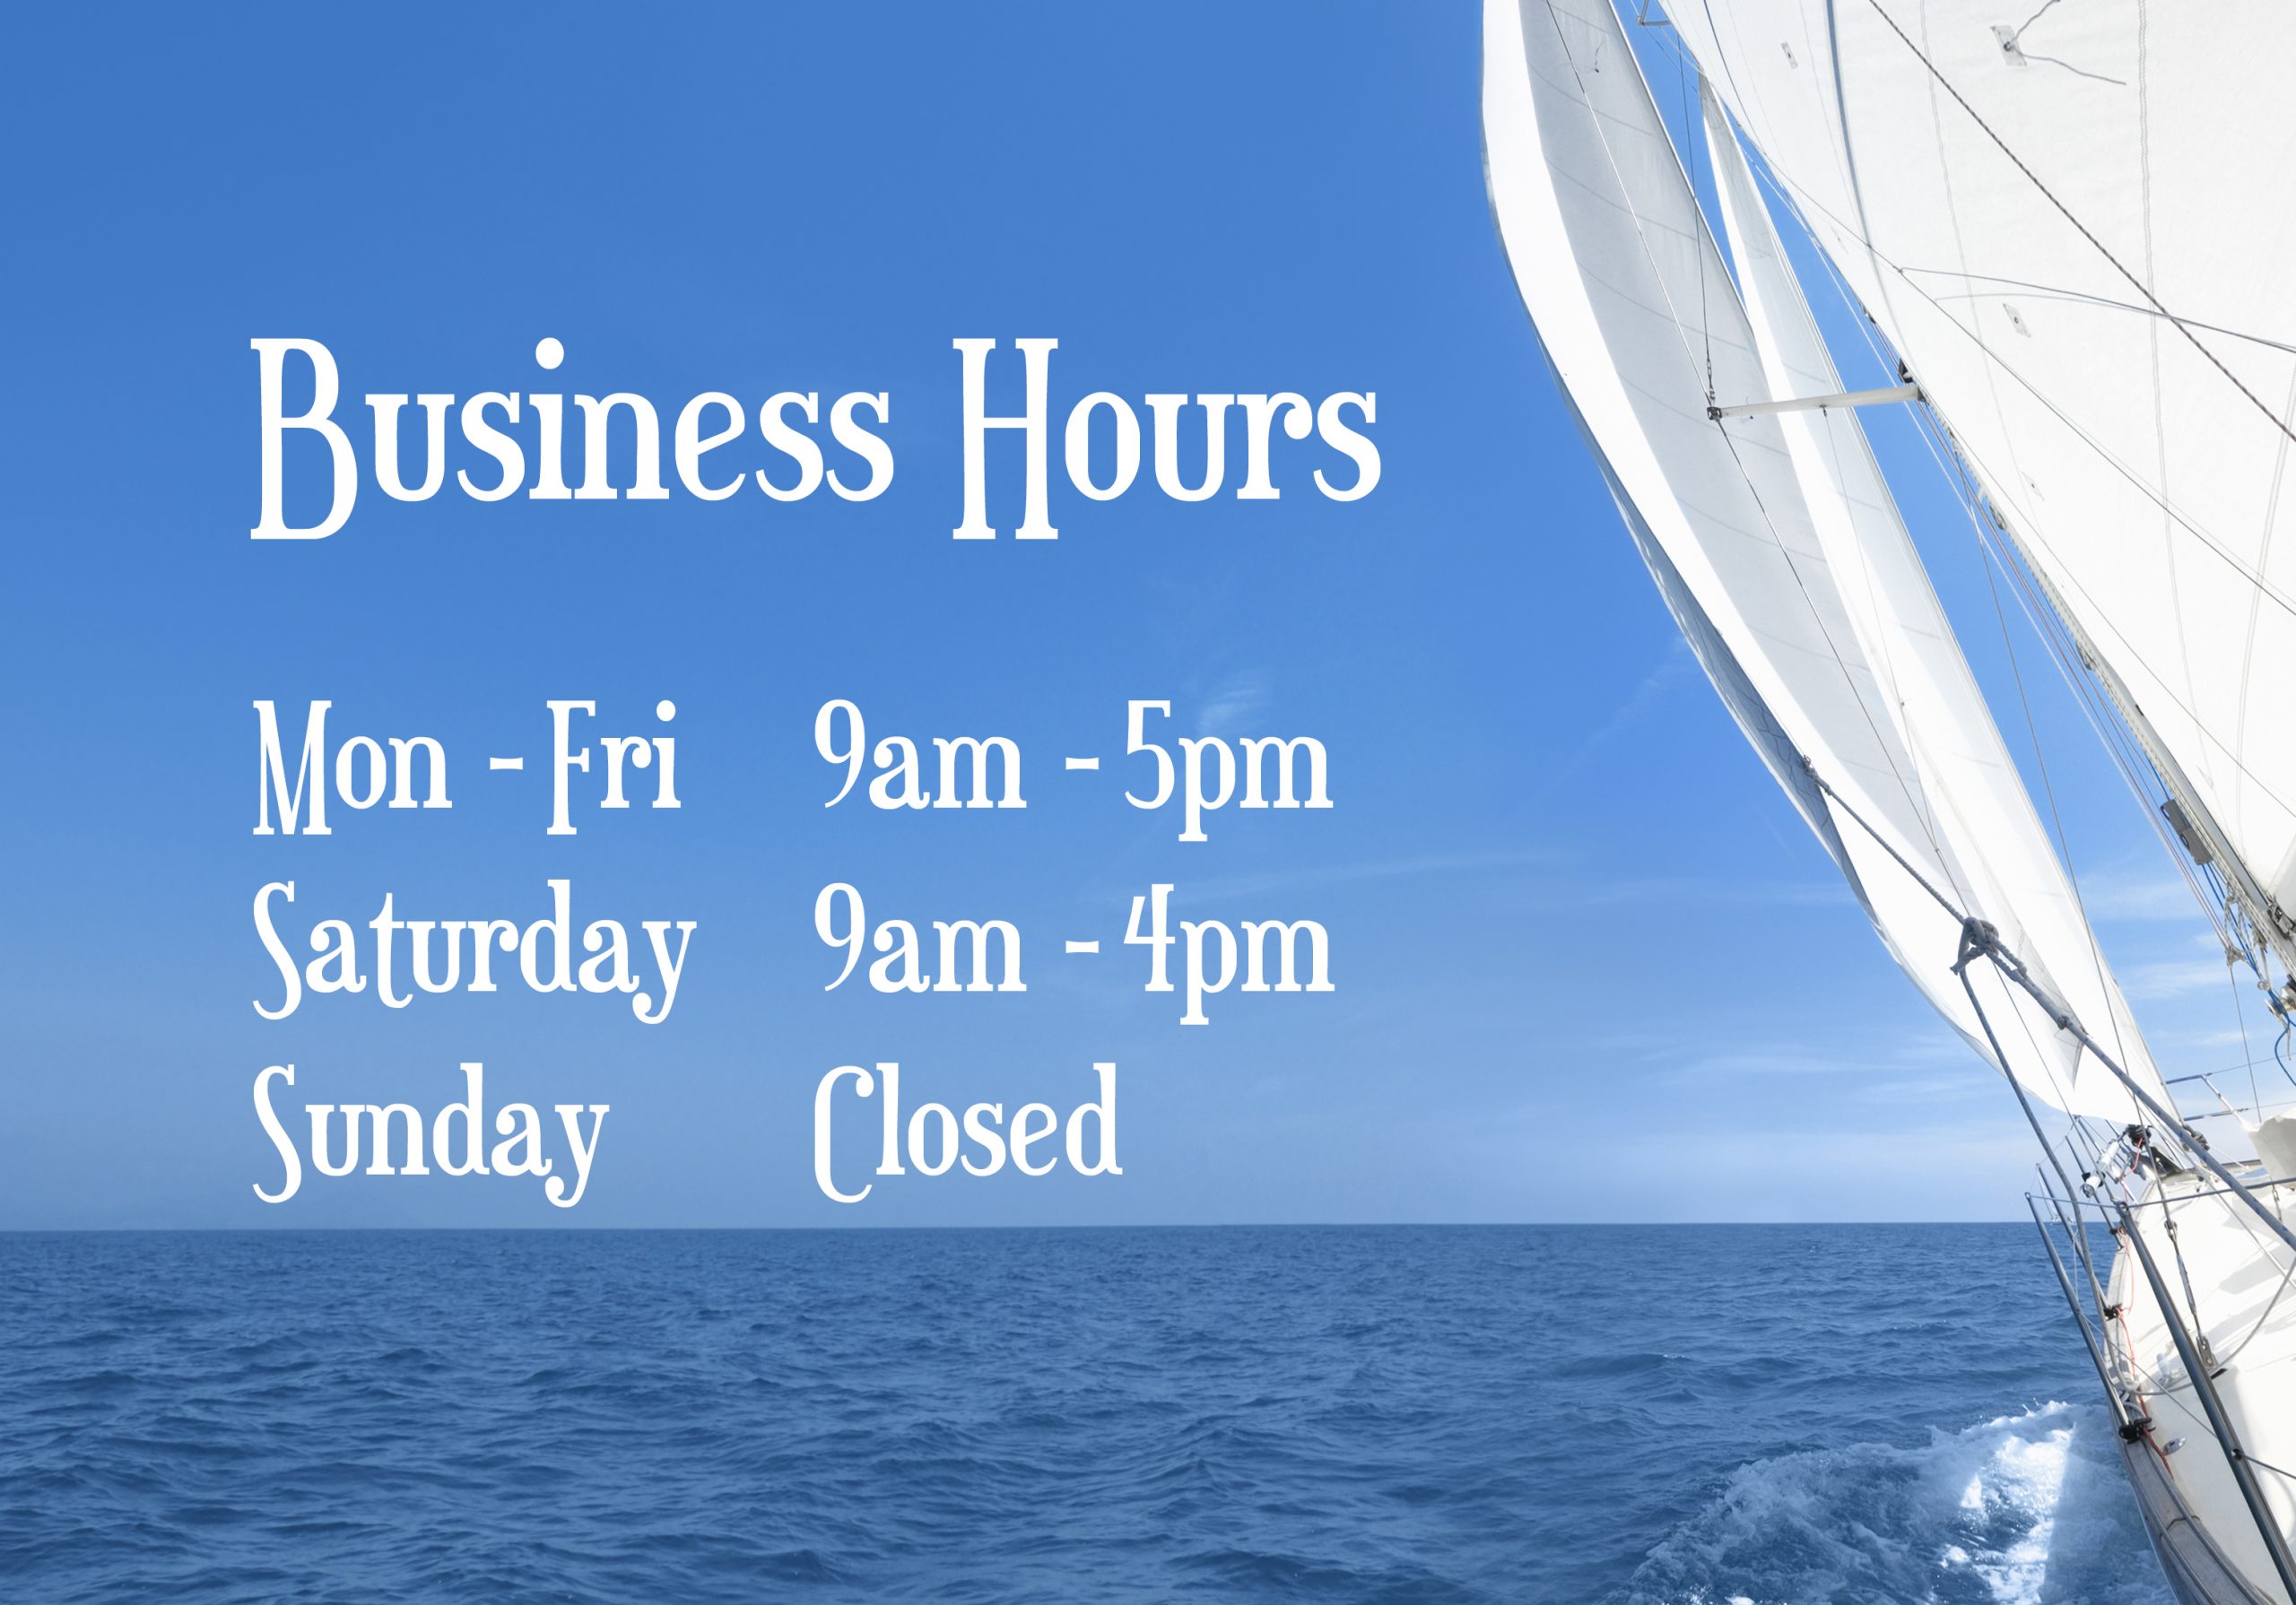 New King Harbor Business Hours